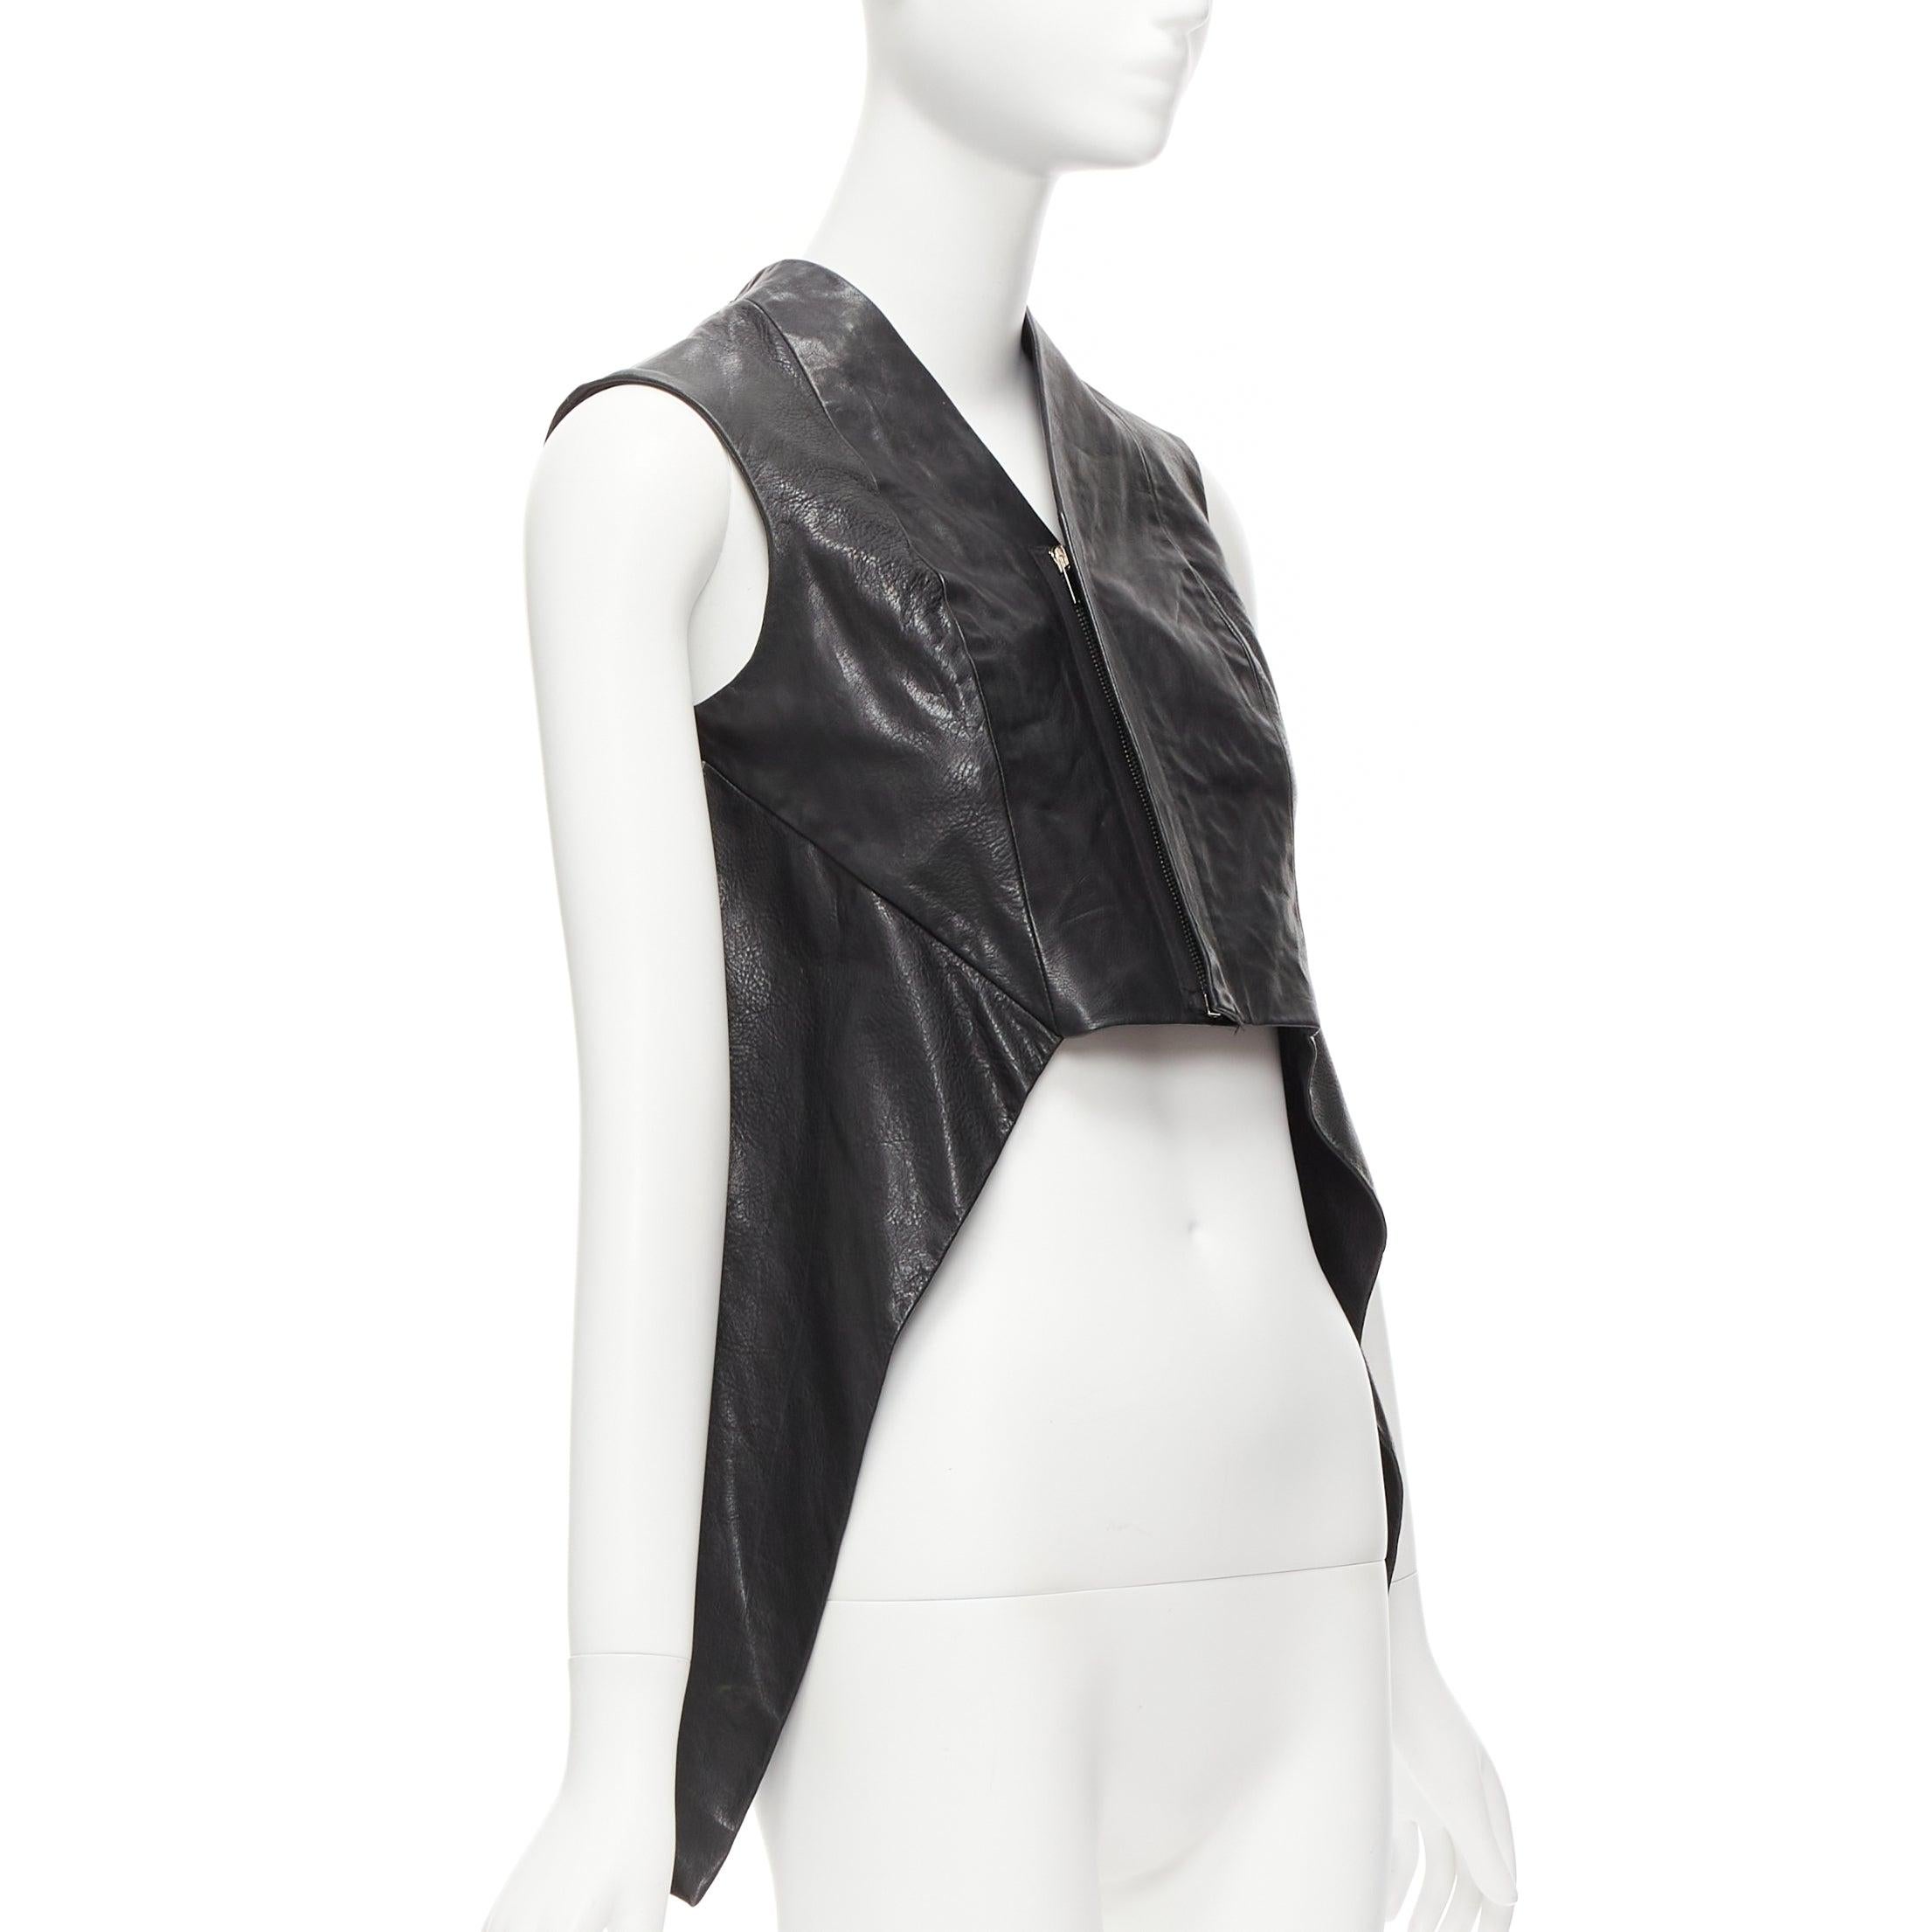 RICK OWENS Wedge black calf leather panelled high low boxy vest IT38 XS
Reference: SSLG/A00004
Brand: Rick Owens
Designer: Rick Owens
Model: Wedge
Material: Calfskin Leather
Color: Black
Pattern: Solid
Closure: Zip
Lining: Black Fabric
Extra